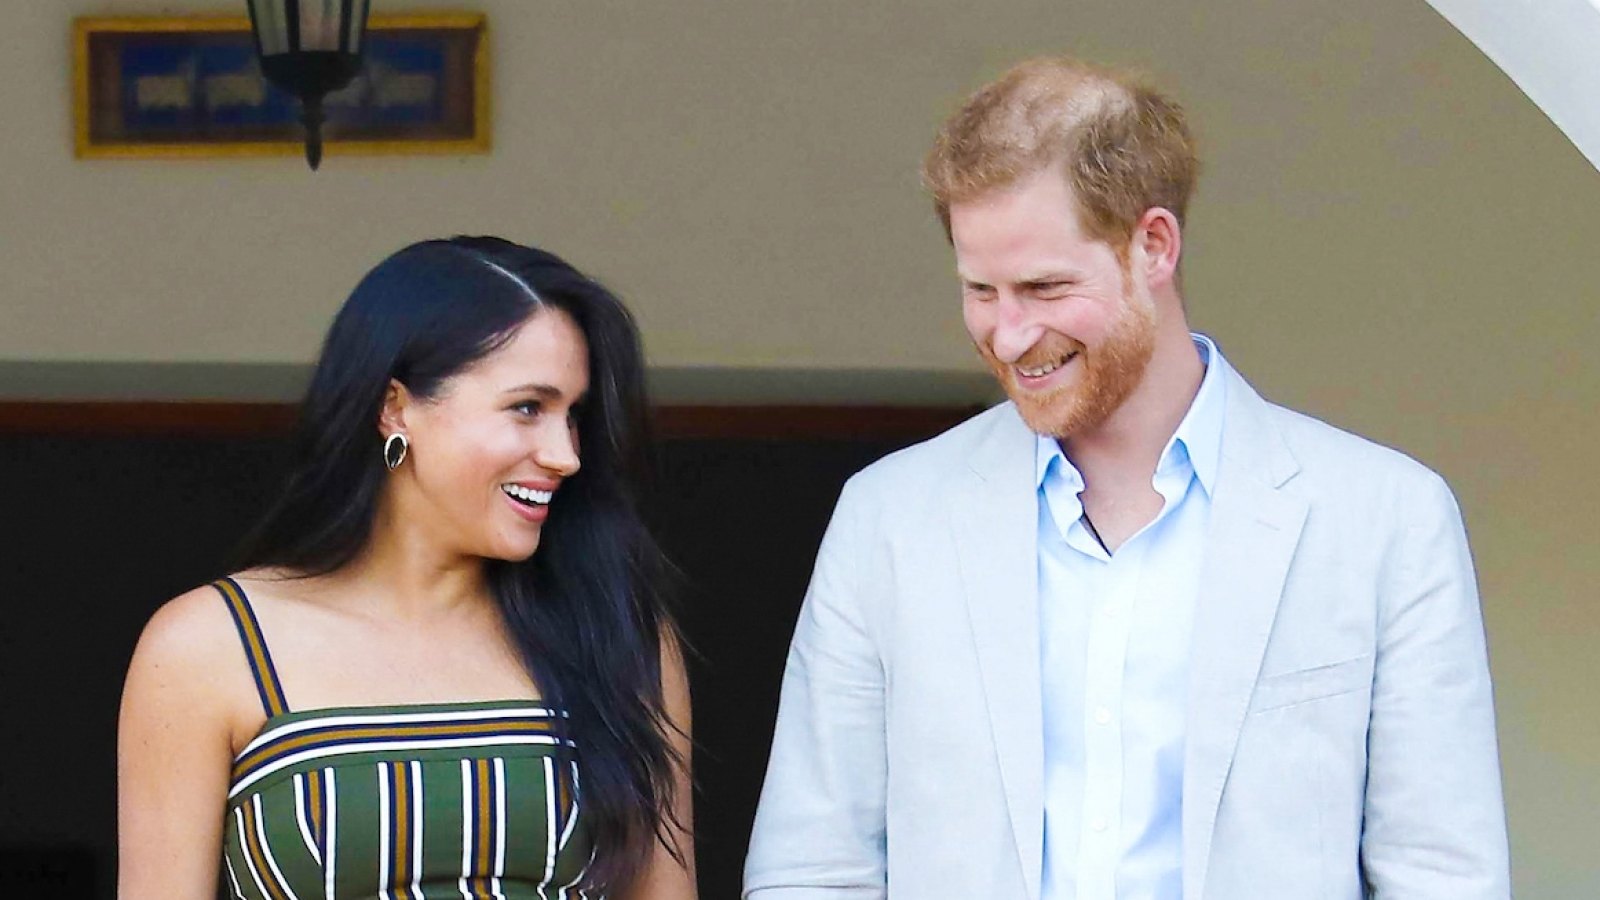 Prince Harry and Meghan Markle Are Adapting a Romance Novel With Parallels to Their Own Life